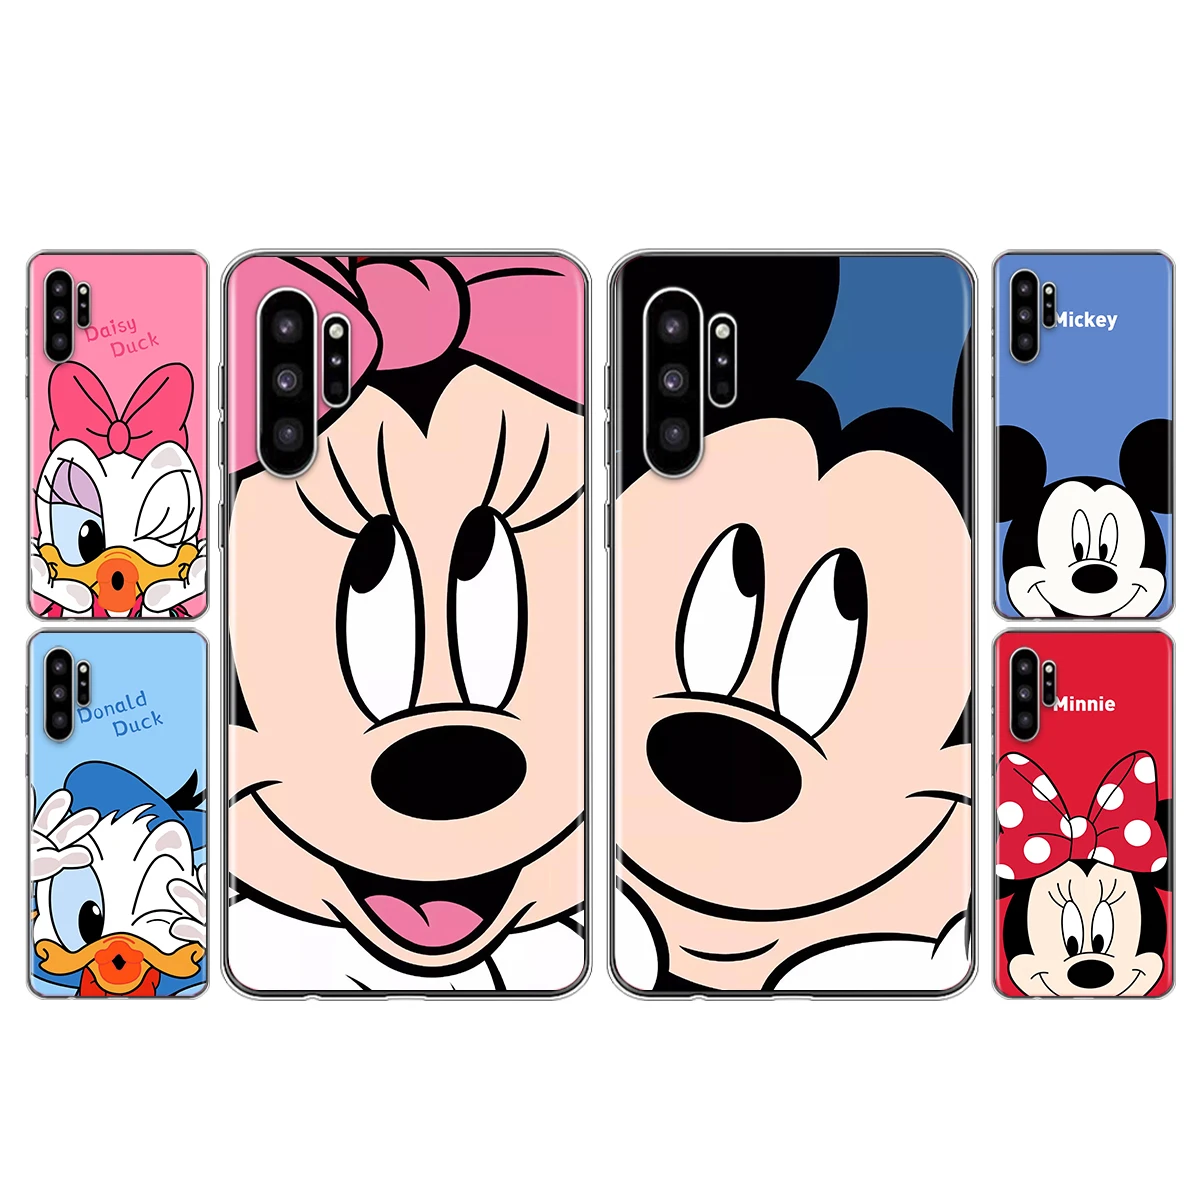 

Mickey Minnie Couple For Samsung Note 20 Ultra 10 Pro Plus 8 9 M02 M31 S M60S M40 M30 M21 M20 M10 S M62 M12 F52 Phone Case